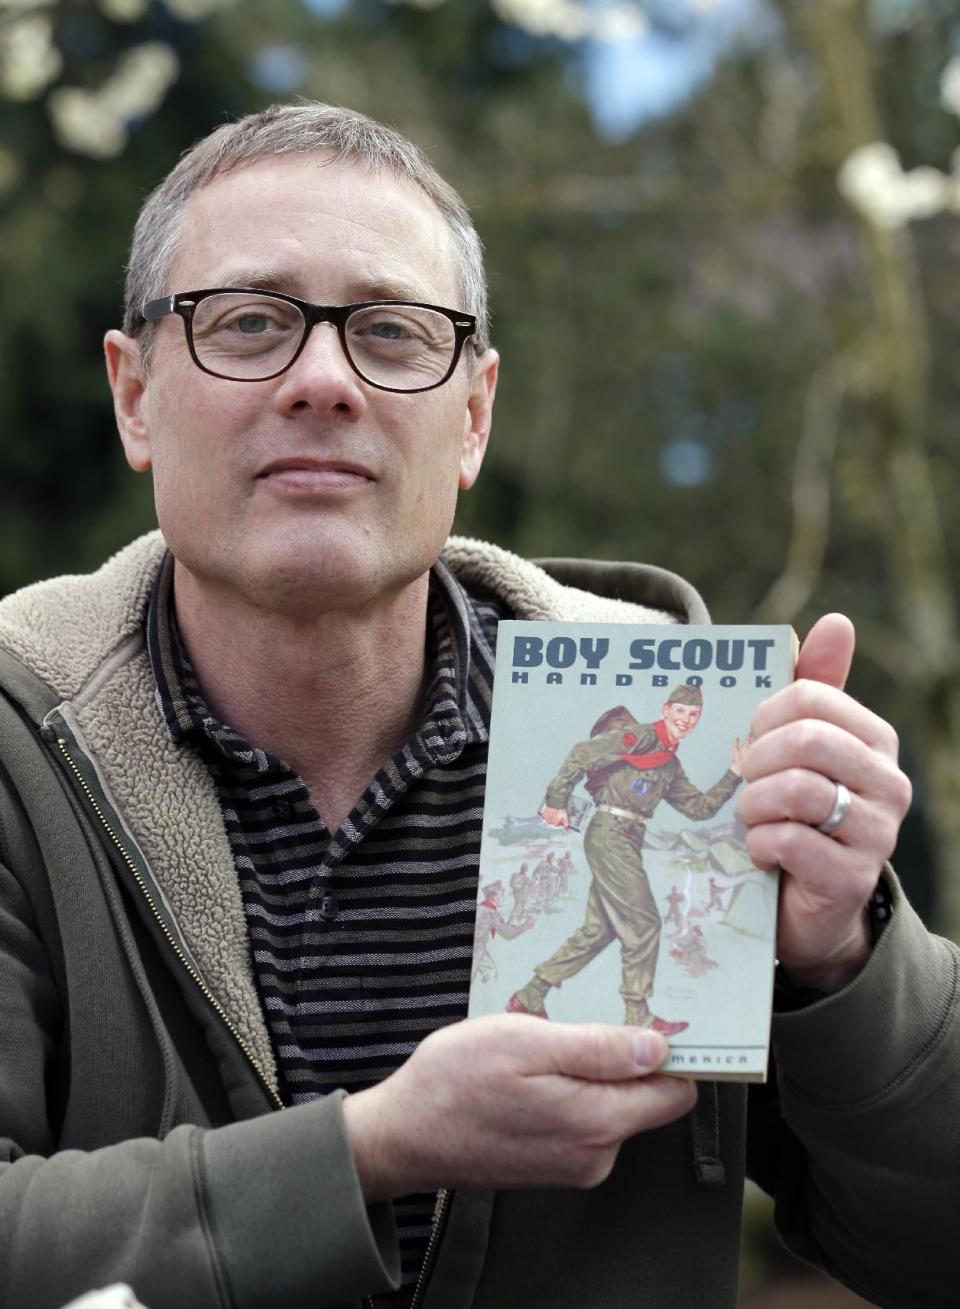 Geoff McGrath displays a vintage Boy Scout Handbook given him as a gift by one of the boys in the Seattle troop he led, Tuesday, April 1, 2014, in Bellevue, Wash. The Boys Scouts of America has removed McGrath, an openly gay troop leader, after saying he made an issue out of his sexual orientation. The BSA told McGrath in a letter Monday that “it has no choice but to revoke your registration” after he told news media he was gay in connection with a news story. McGrath, who earned the rank of Eagle Scout, has been leading Seattle Troop 98 since its application was approved last fall. (AP Photo/Elaine Thompson)